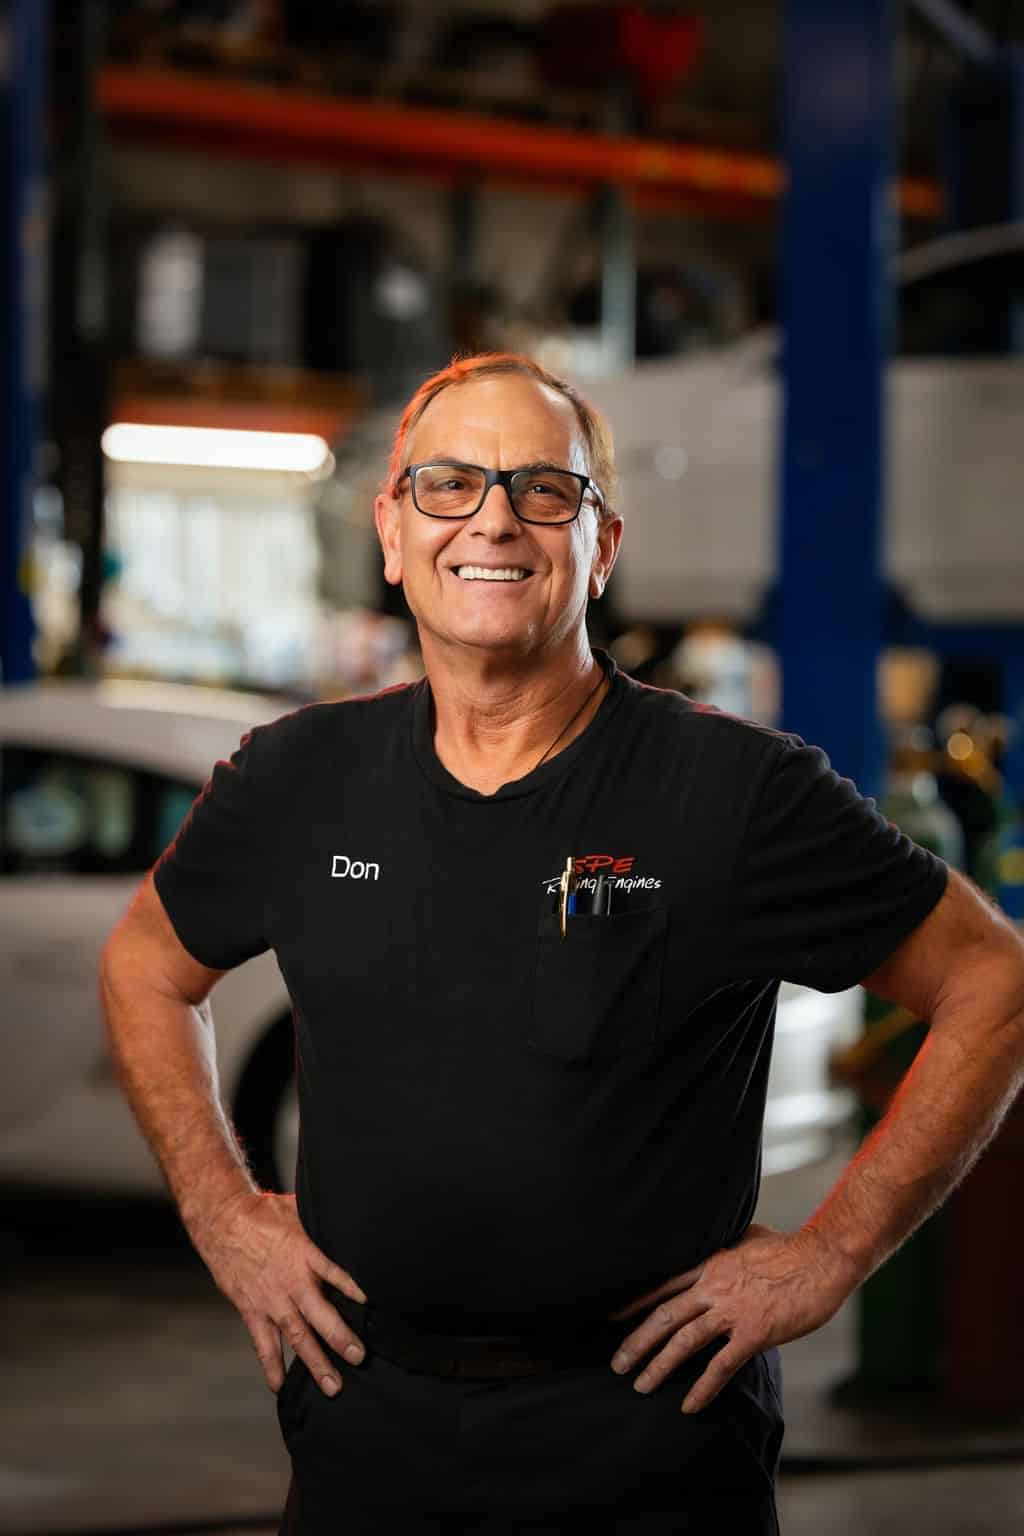 Don Owner, Technician, Machinist at Simmonson Automotive